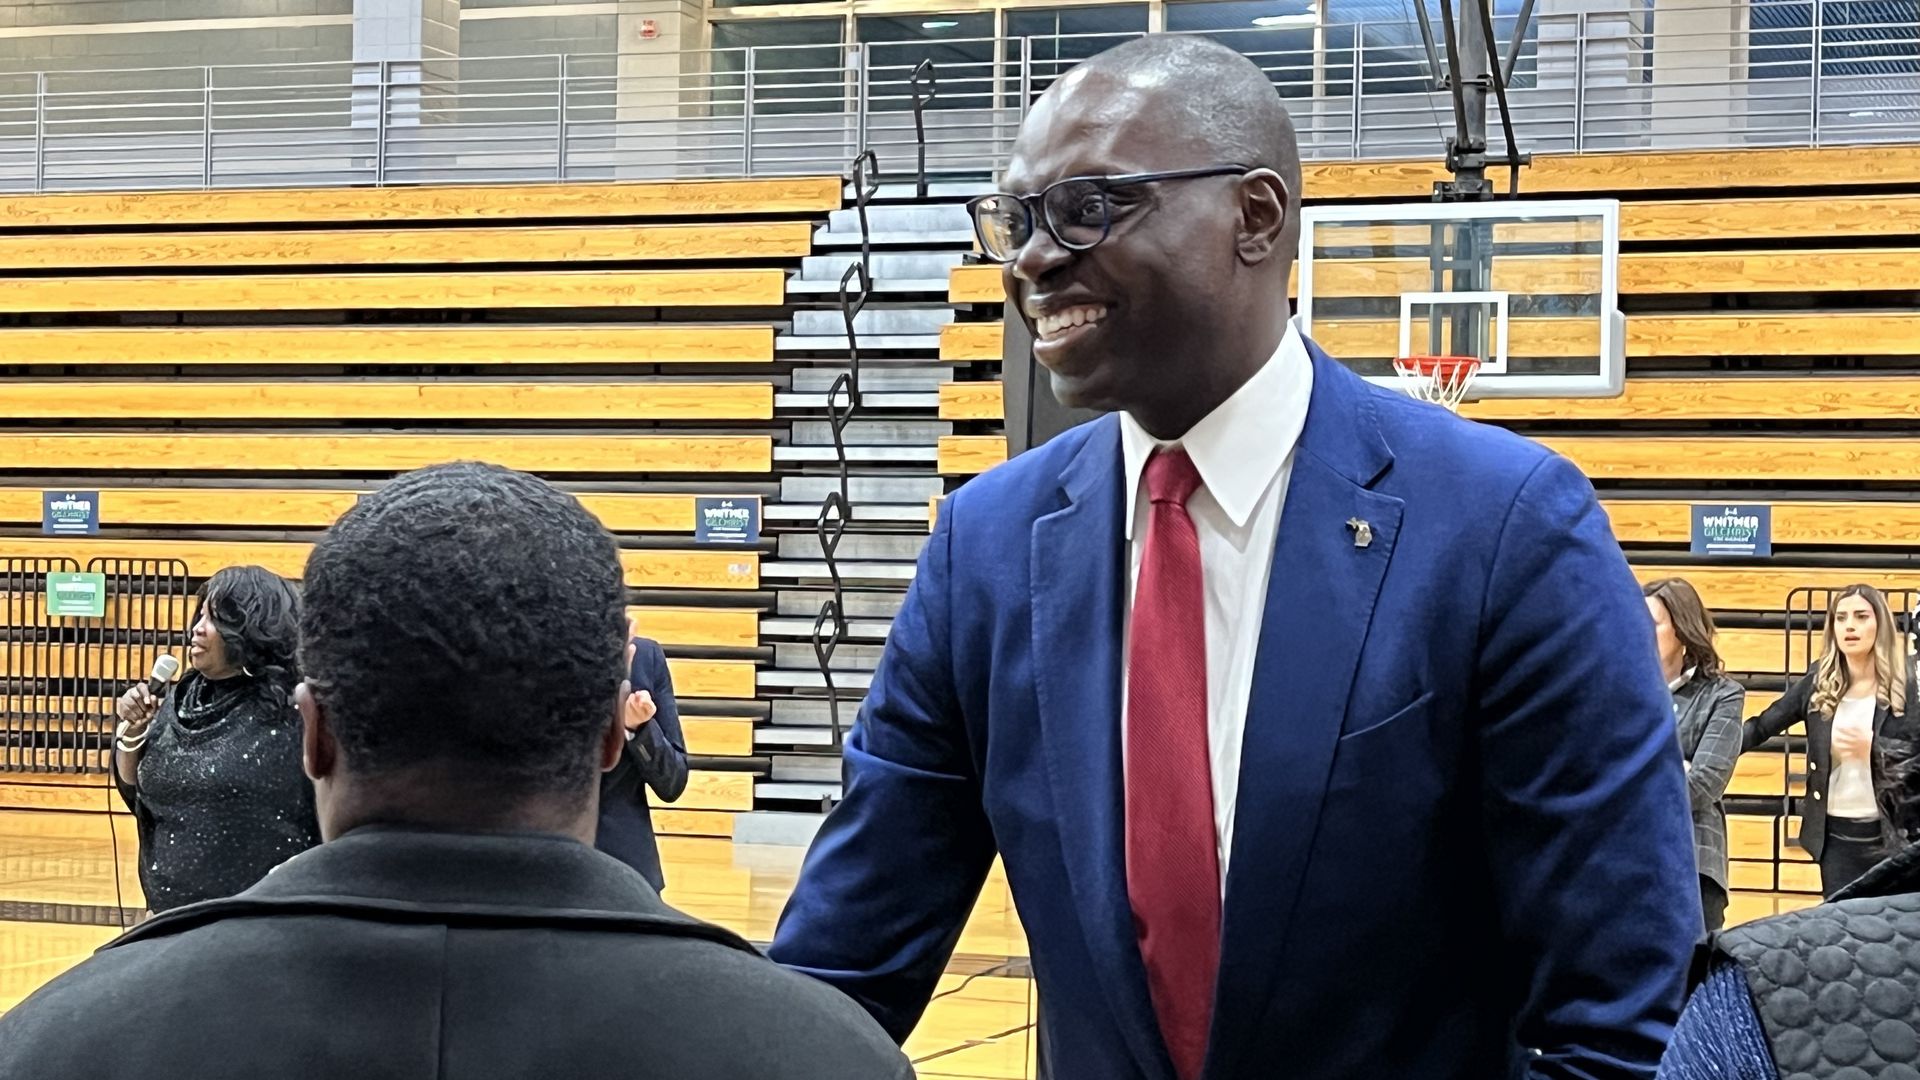 Lt. Gov. Garlin Gilchrist inside Cass Tech High School's gymnasium in October 2022 for a Whitmer campaign event.